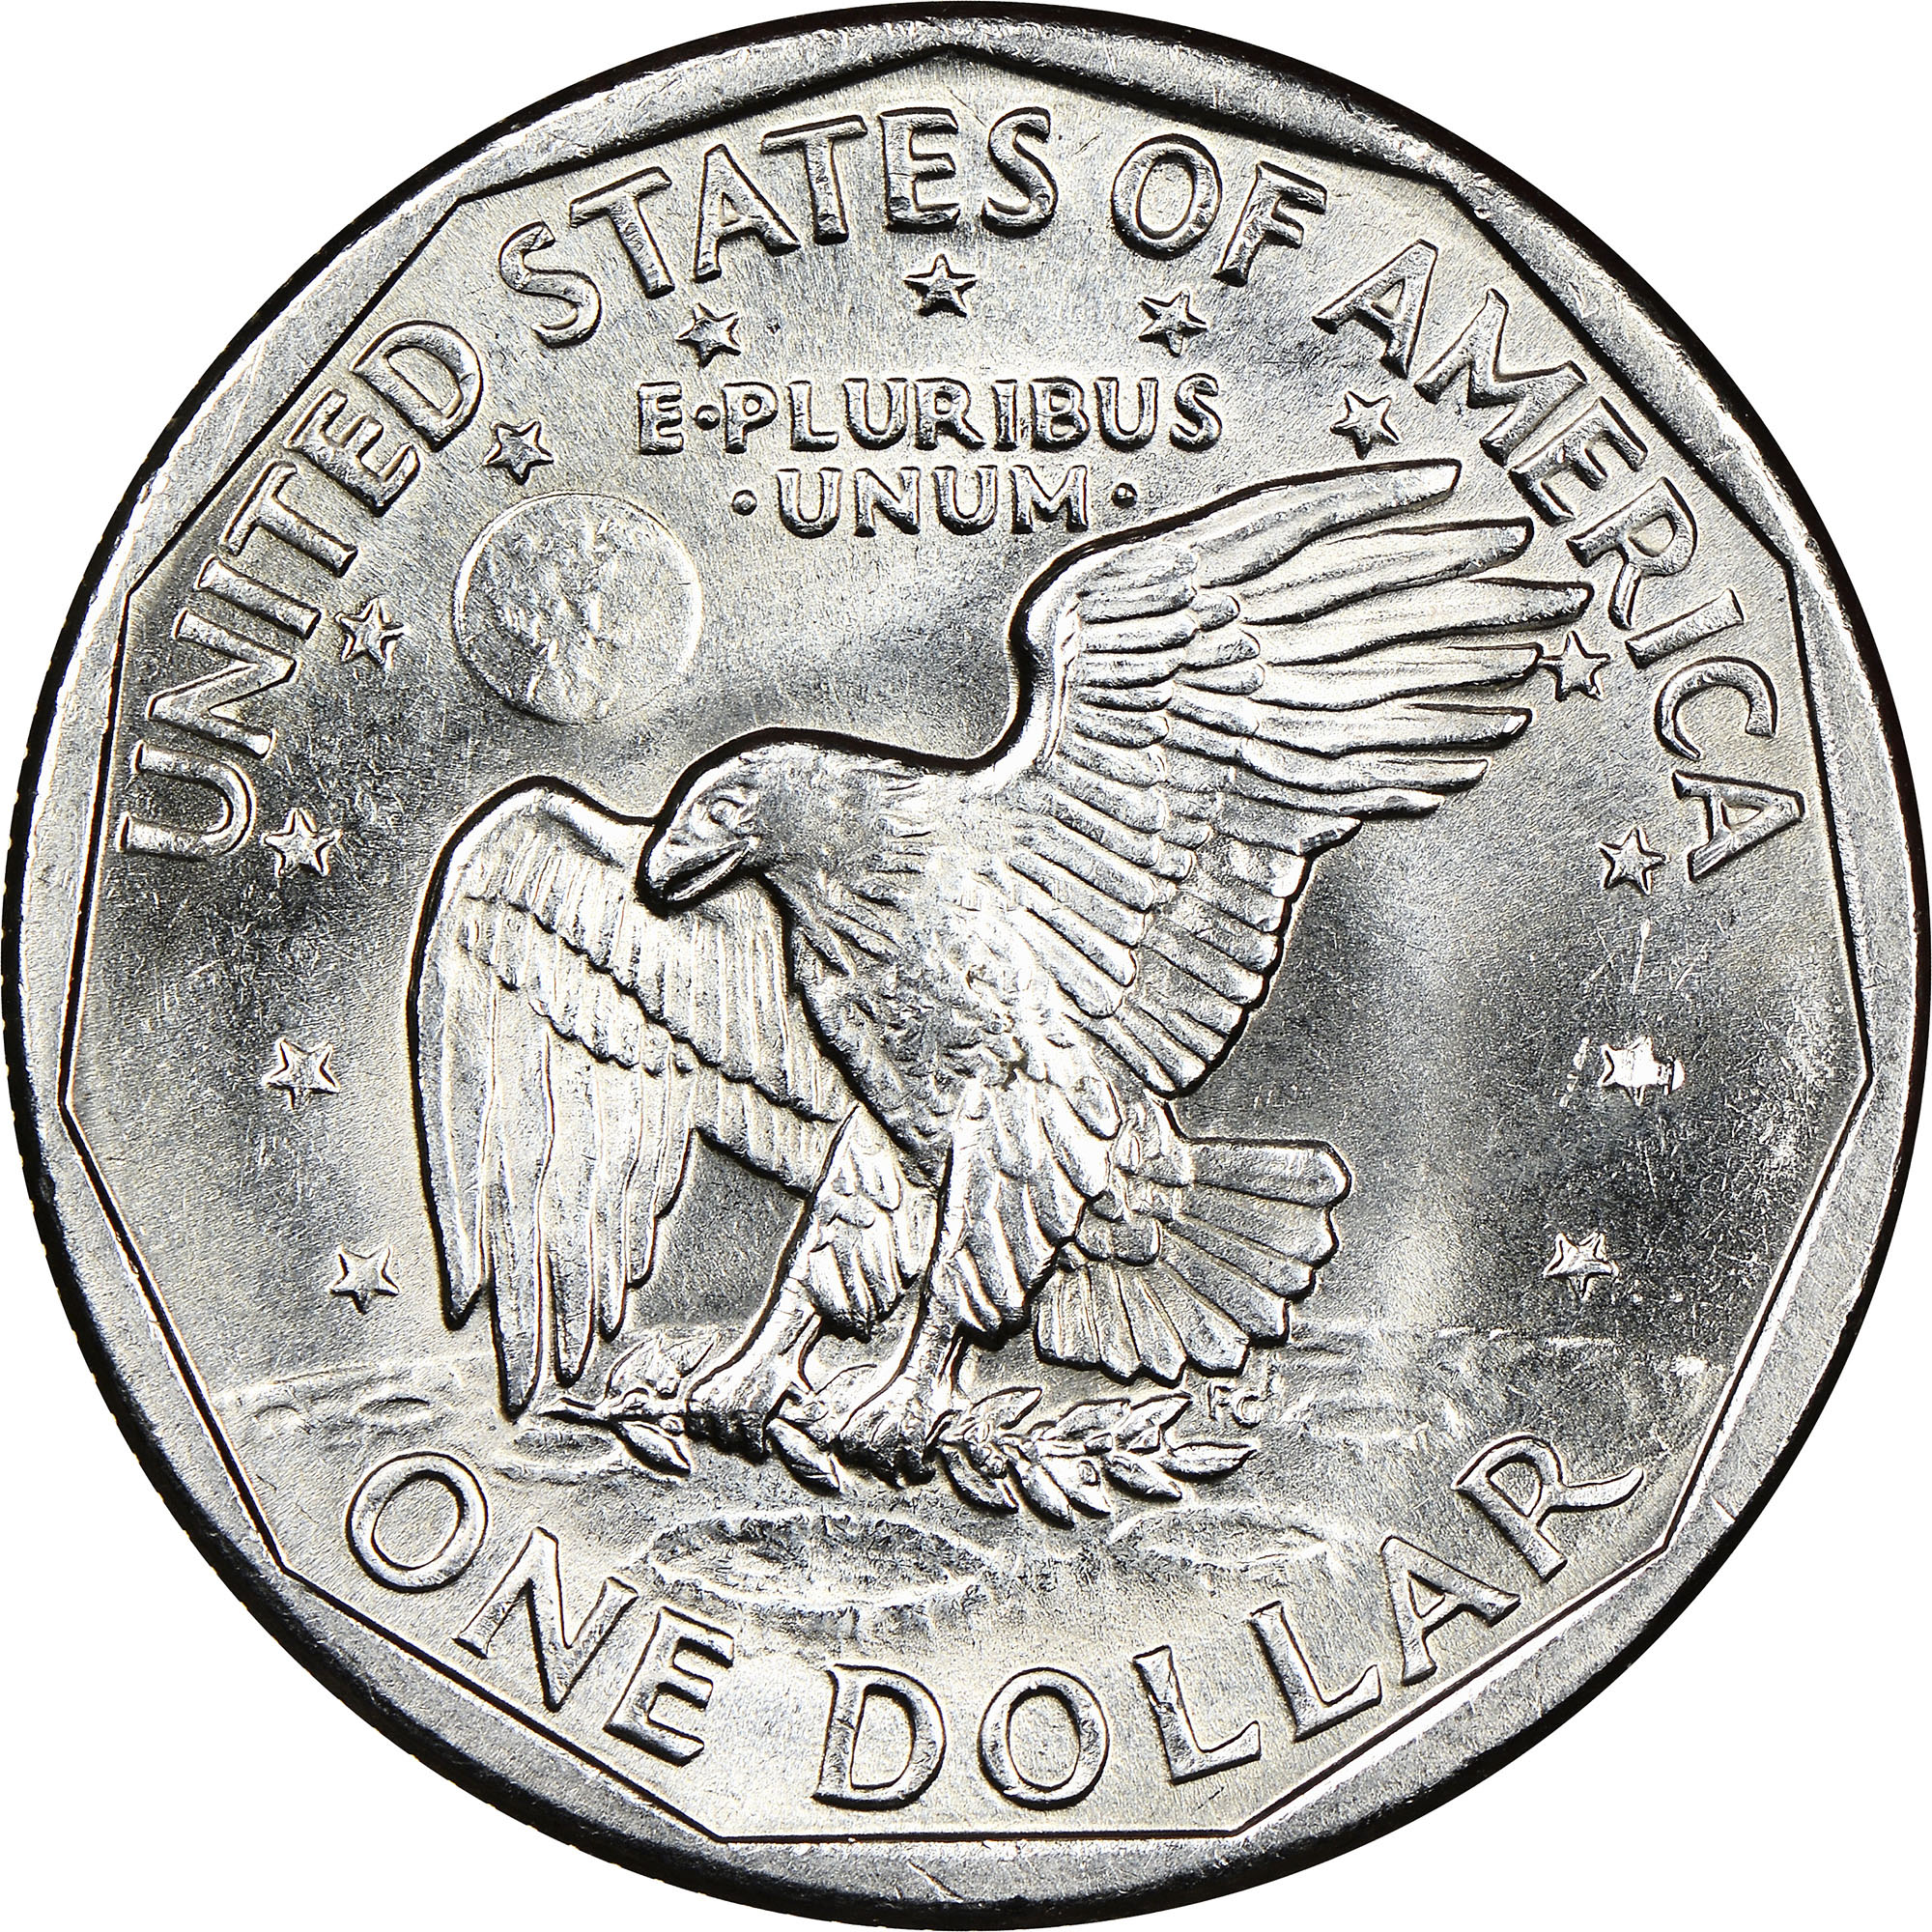 A One Dollar Coin Once Sold for Over $15, — Here’s How To Tell if Yours Is Valuable